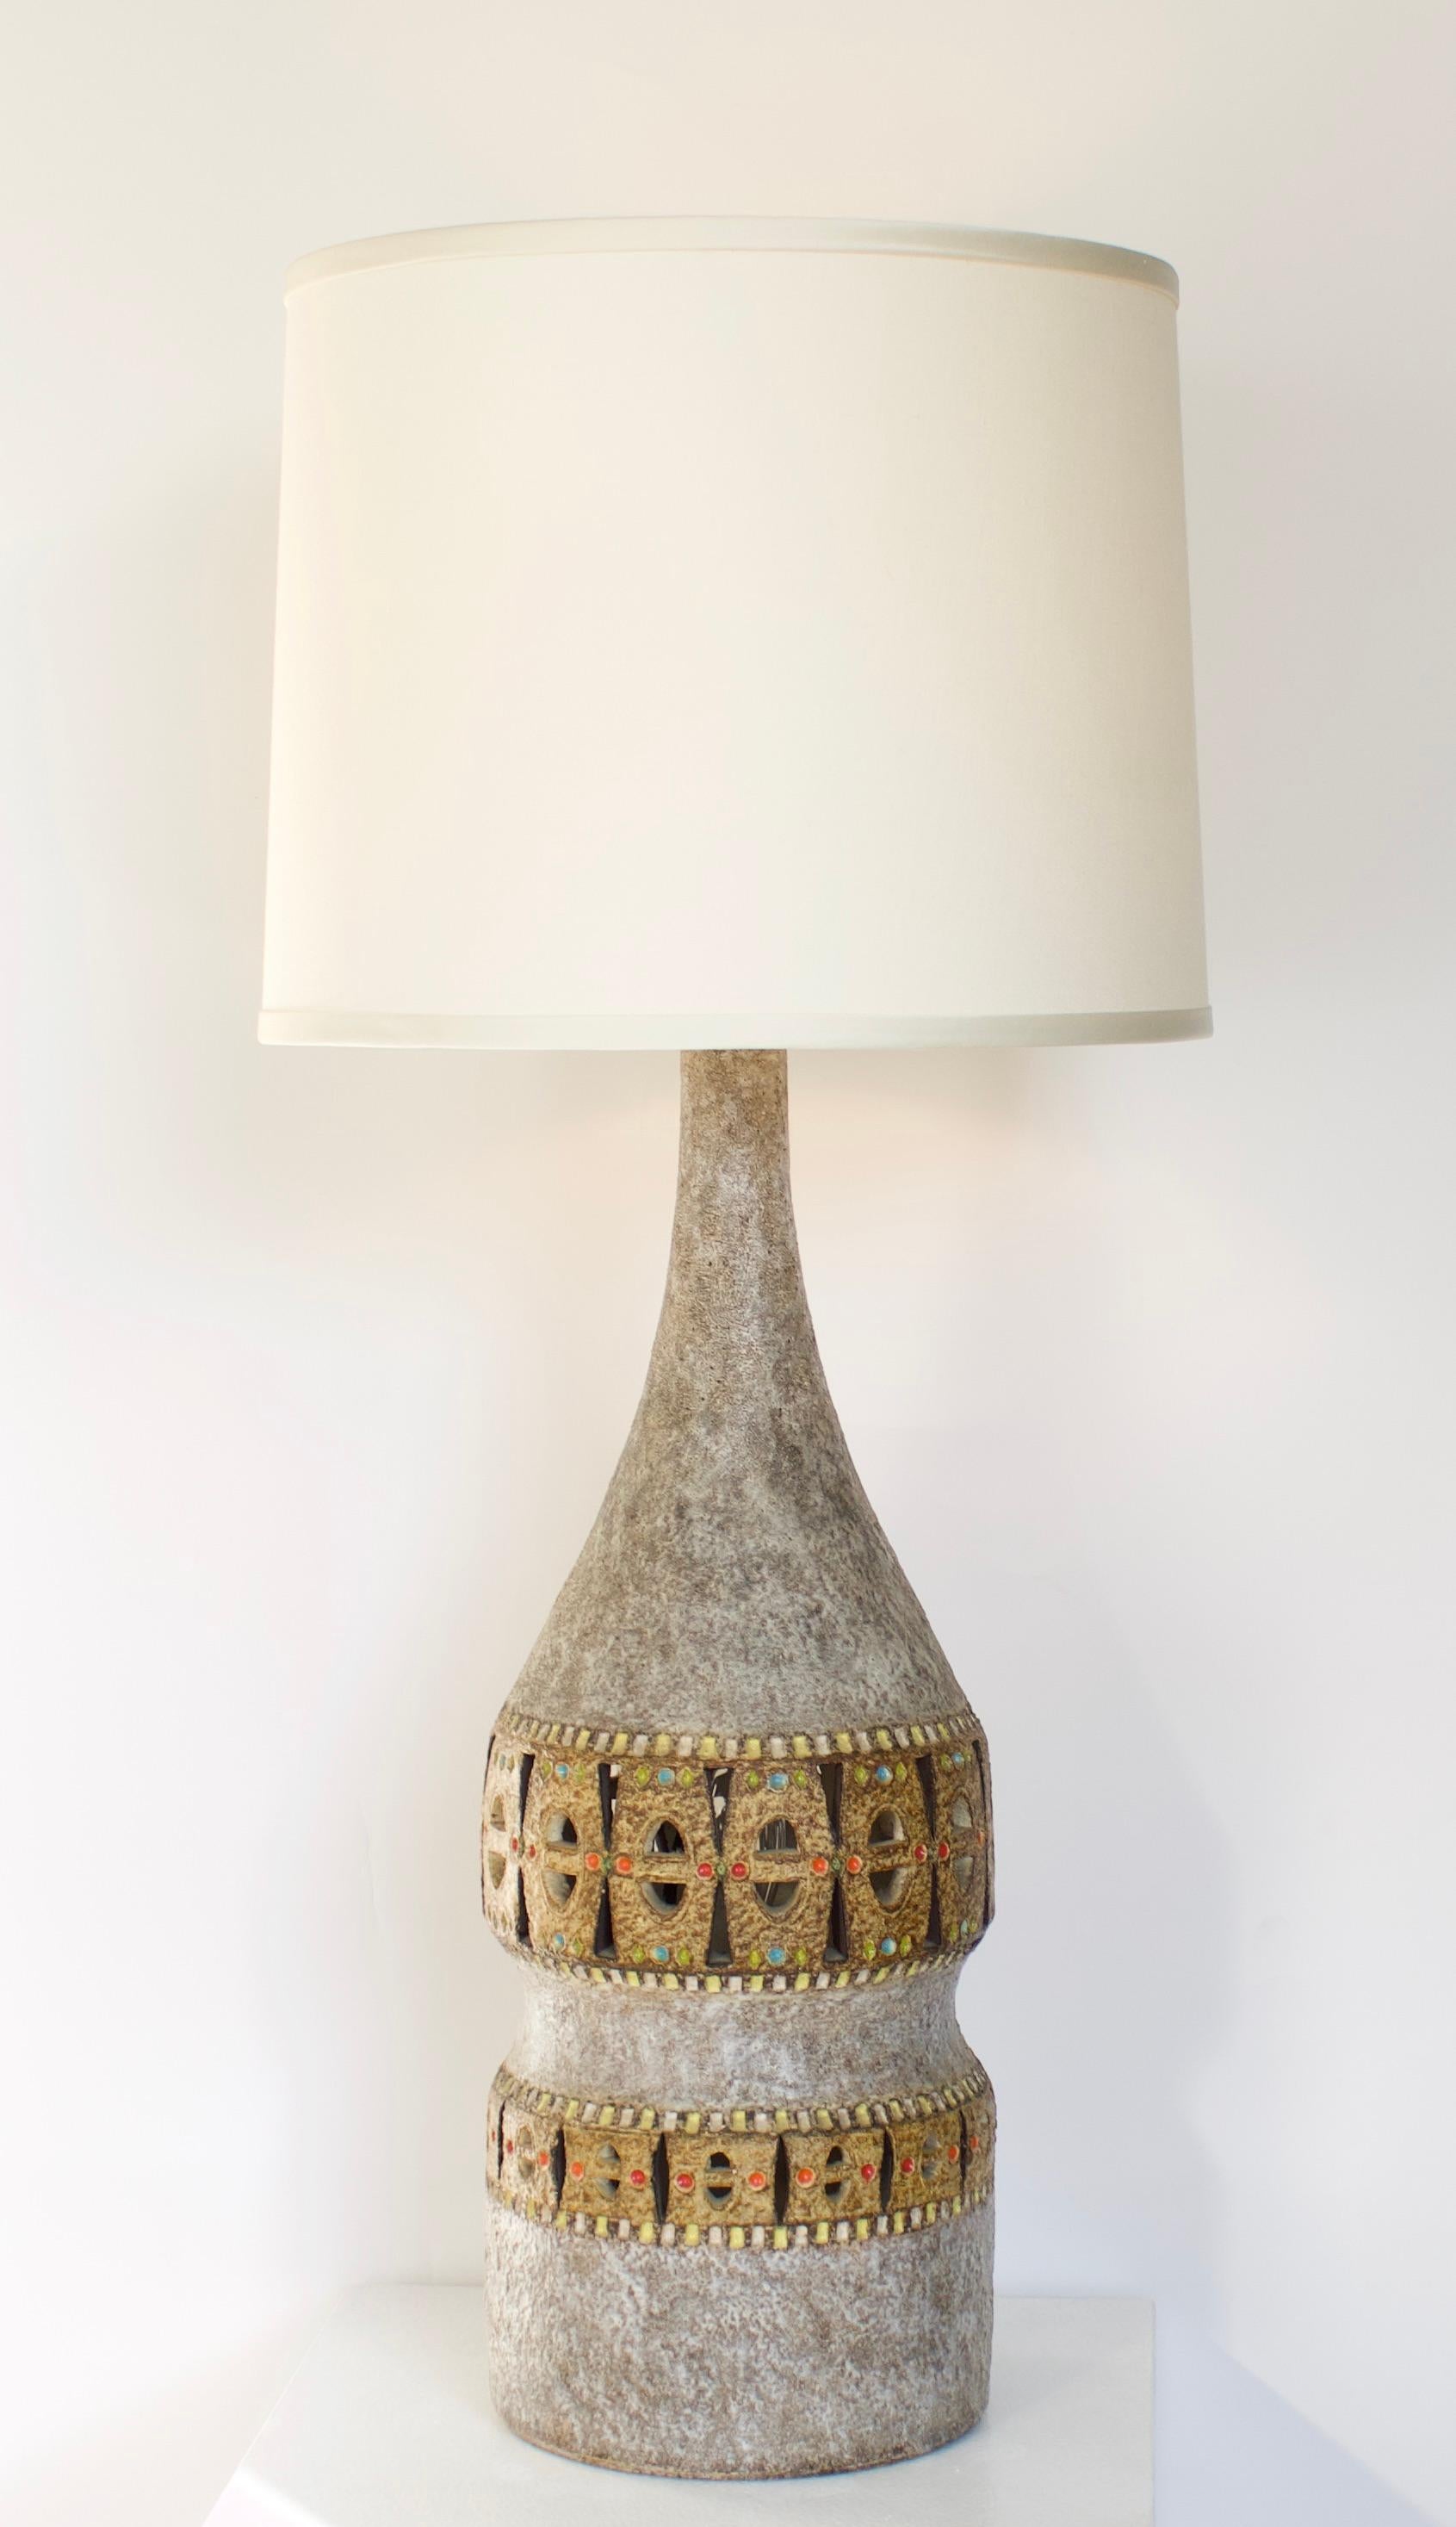 Raphael Giarrusso Peirced French Ceramic Table Lamp Accolay, circa 1967 For Sale 2